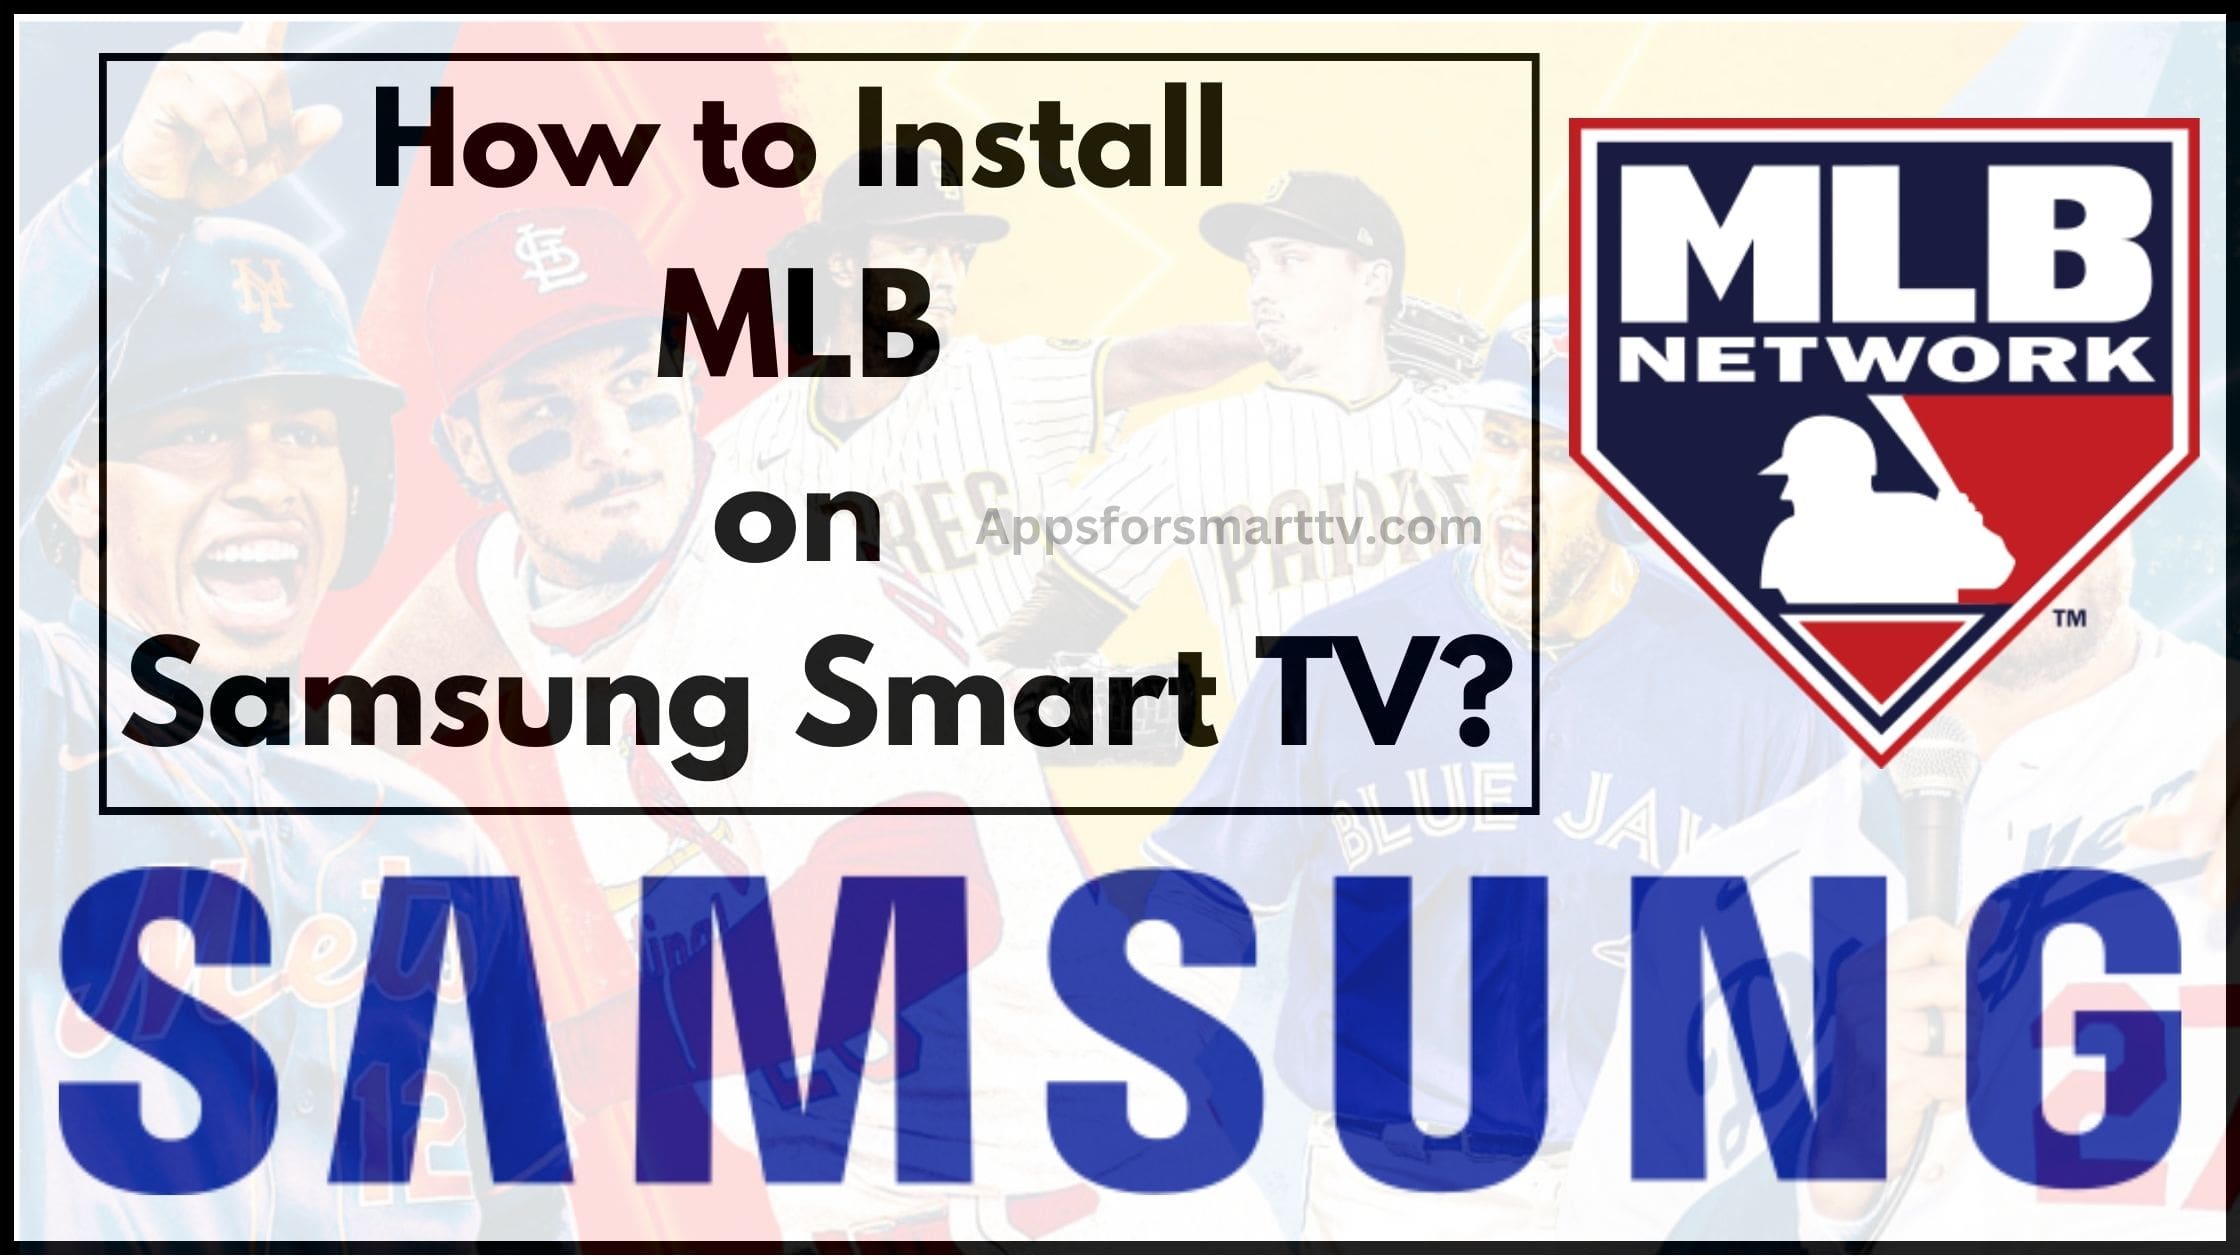 How to Install MLB on Samsung Smart TV?